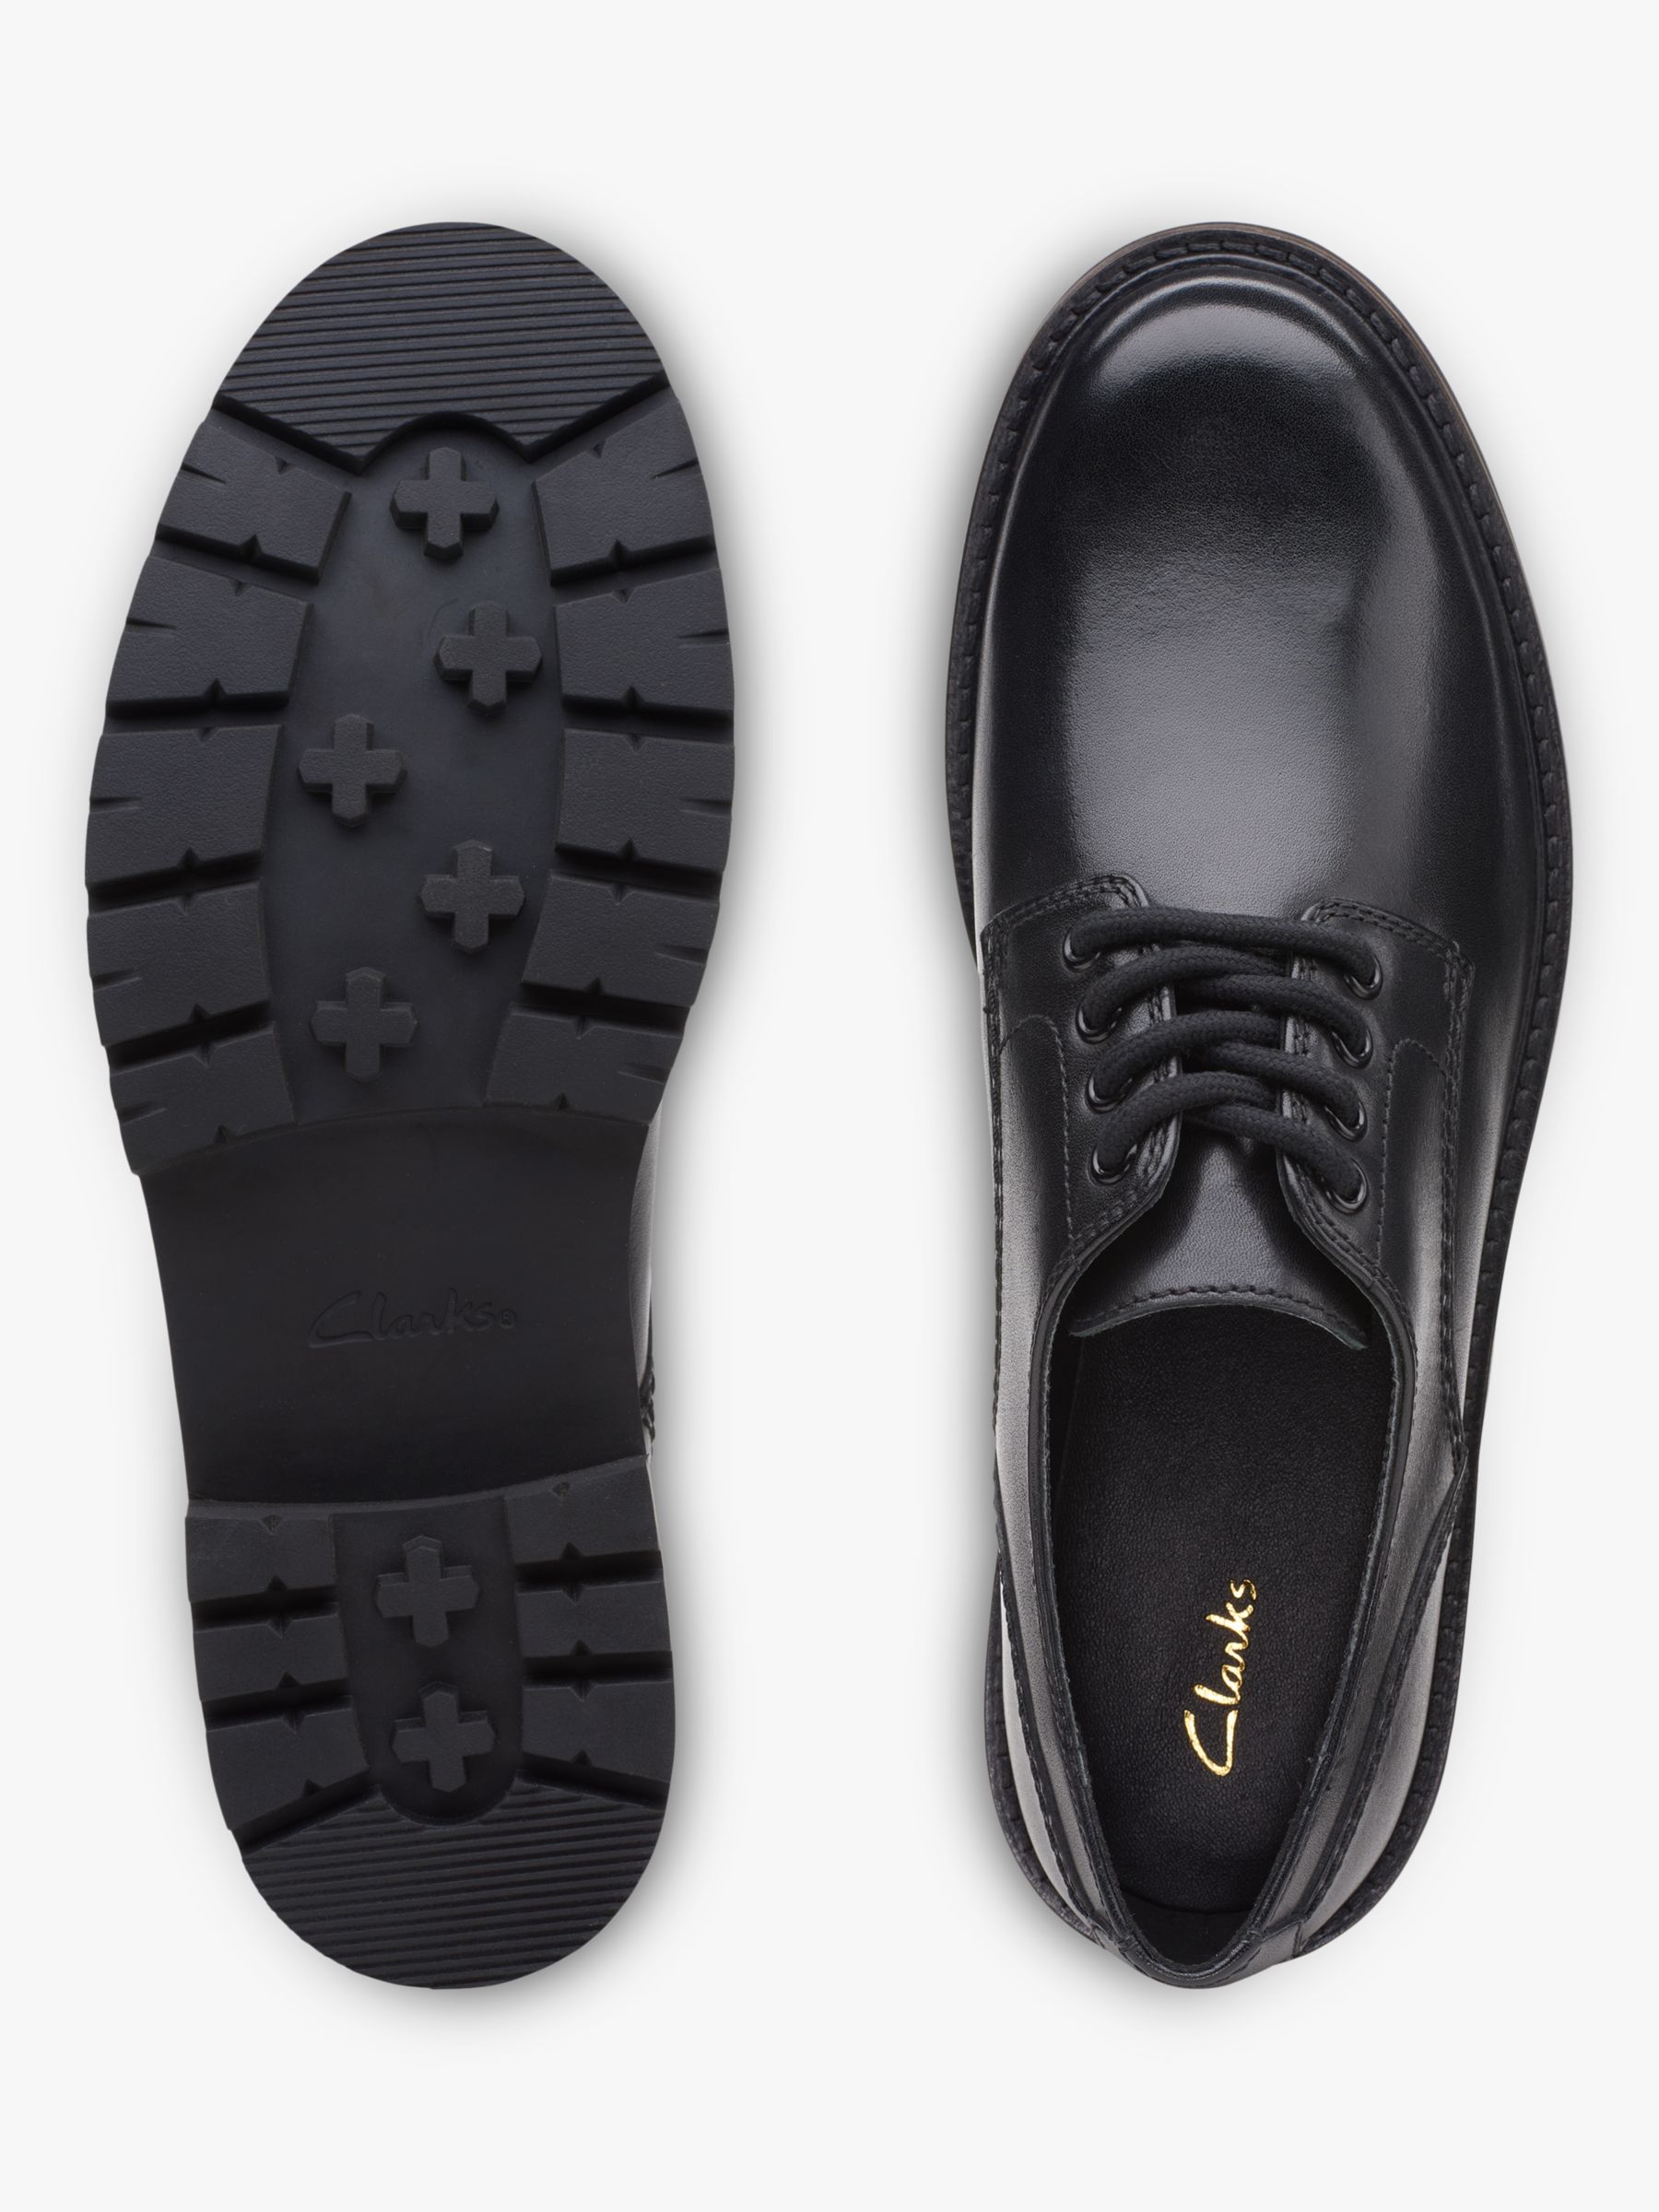 Clarks Orianna Leather Chunky Derby Shoes, Black at John Lewis & Partners